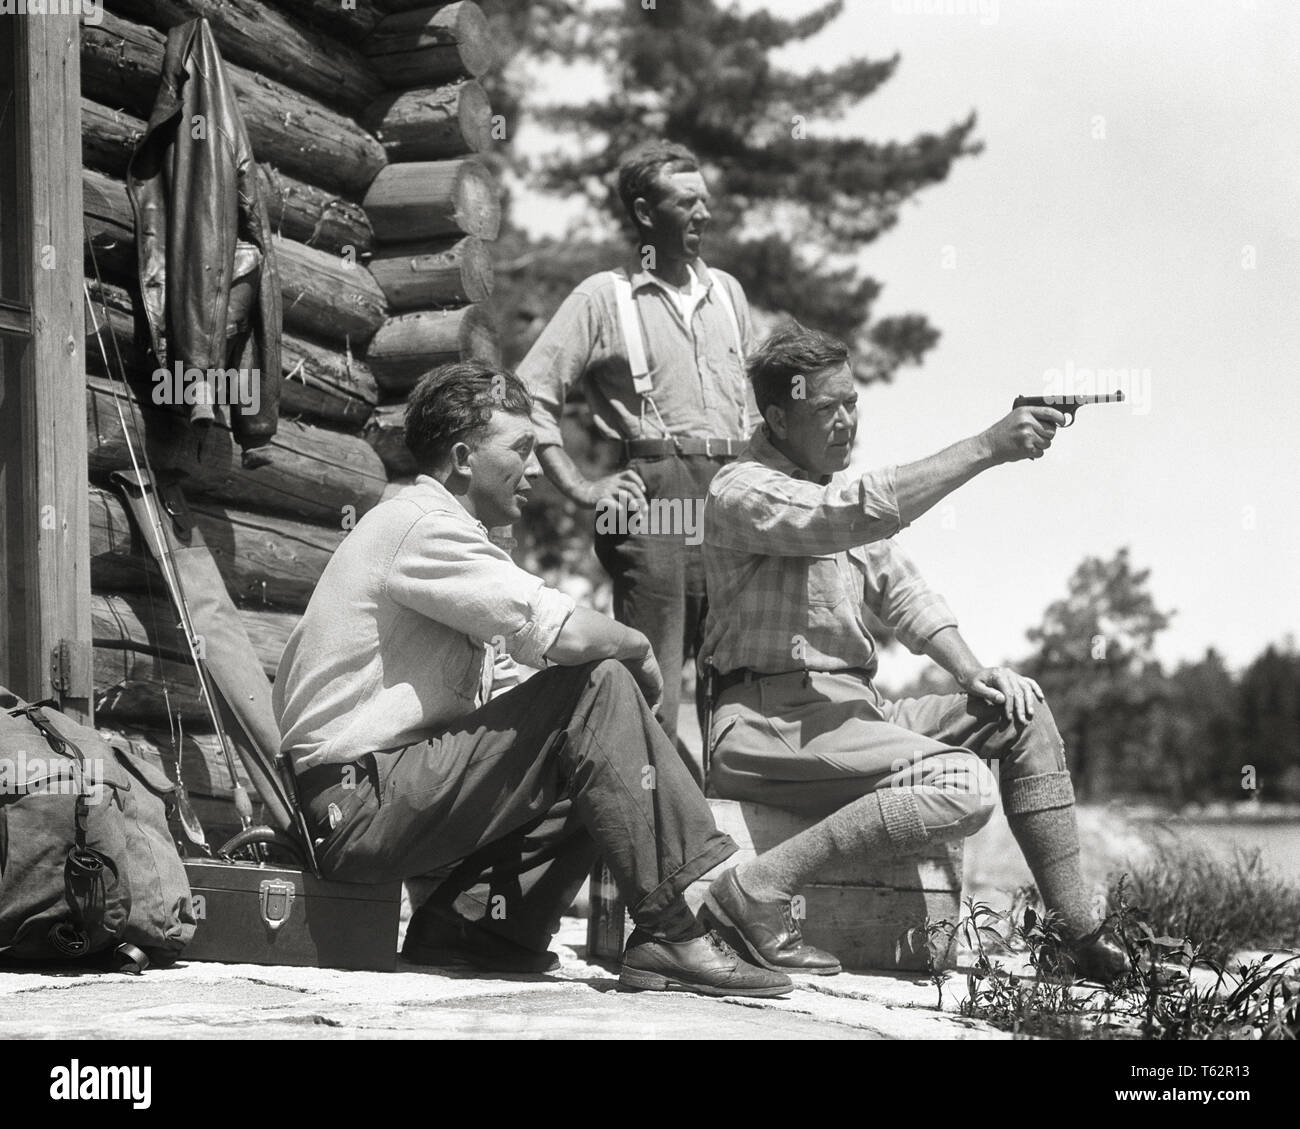 1930s THREE MEN TOGETHER OUTSIDE NORTH WOODS HUNTING FISHING LOG CABIN SEATED MAN AIMING PLINKING WITH COLT 22 CALIBER PISTOL - a5530 HAR001 HARS EXTERIOR KNOWLEDGE LEADERSHIP RECREATION DIRECTION CONNECTION STYLISH OUTDOORSMAN SPORTSMEN AIMING COLT COOPERATION FIREARM FIREARMS MID-ADULT MID-ADULT MAN PISTOL TOGETHERNESS 22 CALIBER BLACK AND WHITE CAUCASIAN ETHNICITY HAR001 OLD FASHIONED Stock Photo